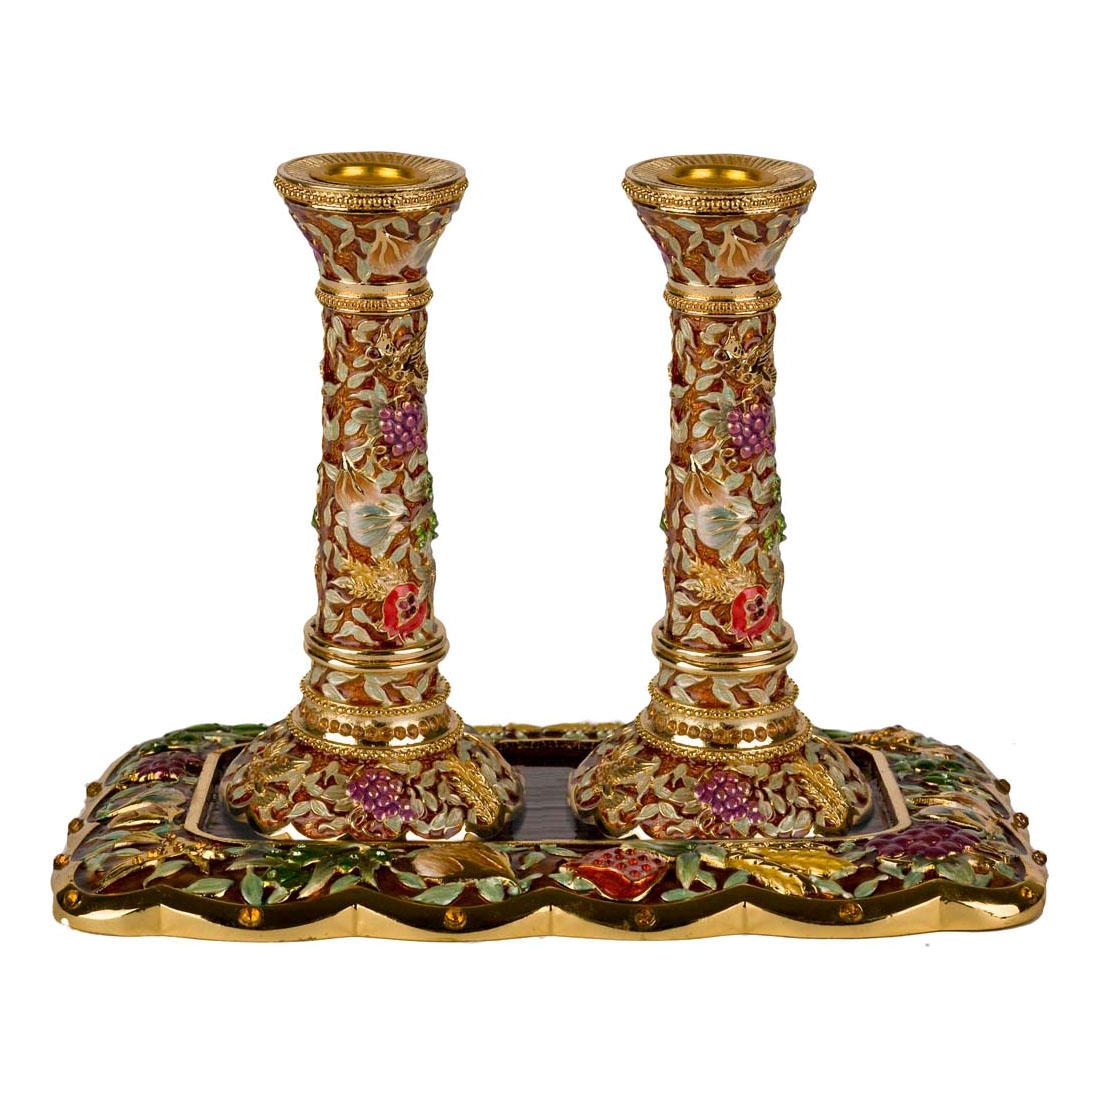 24K Gold Plated Jeweled Seven Species Candlesticks - Brown with Emerald Crystal Band - 1